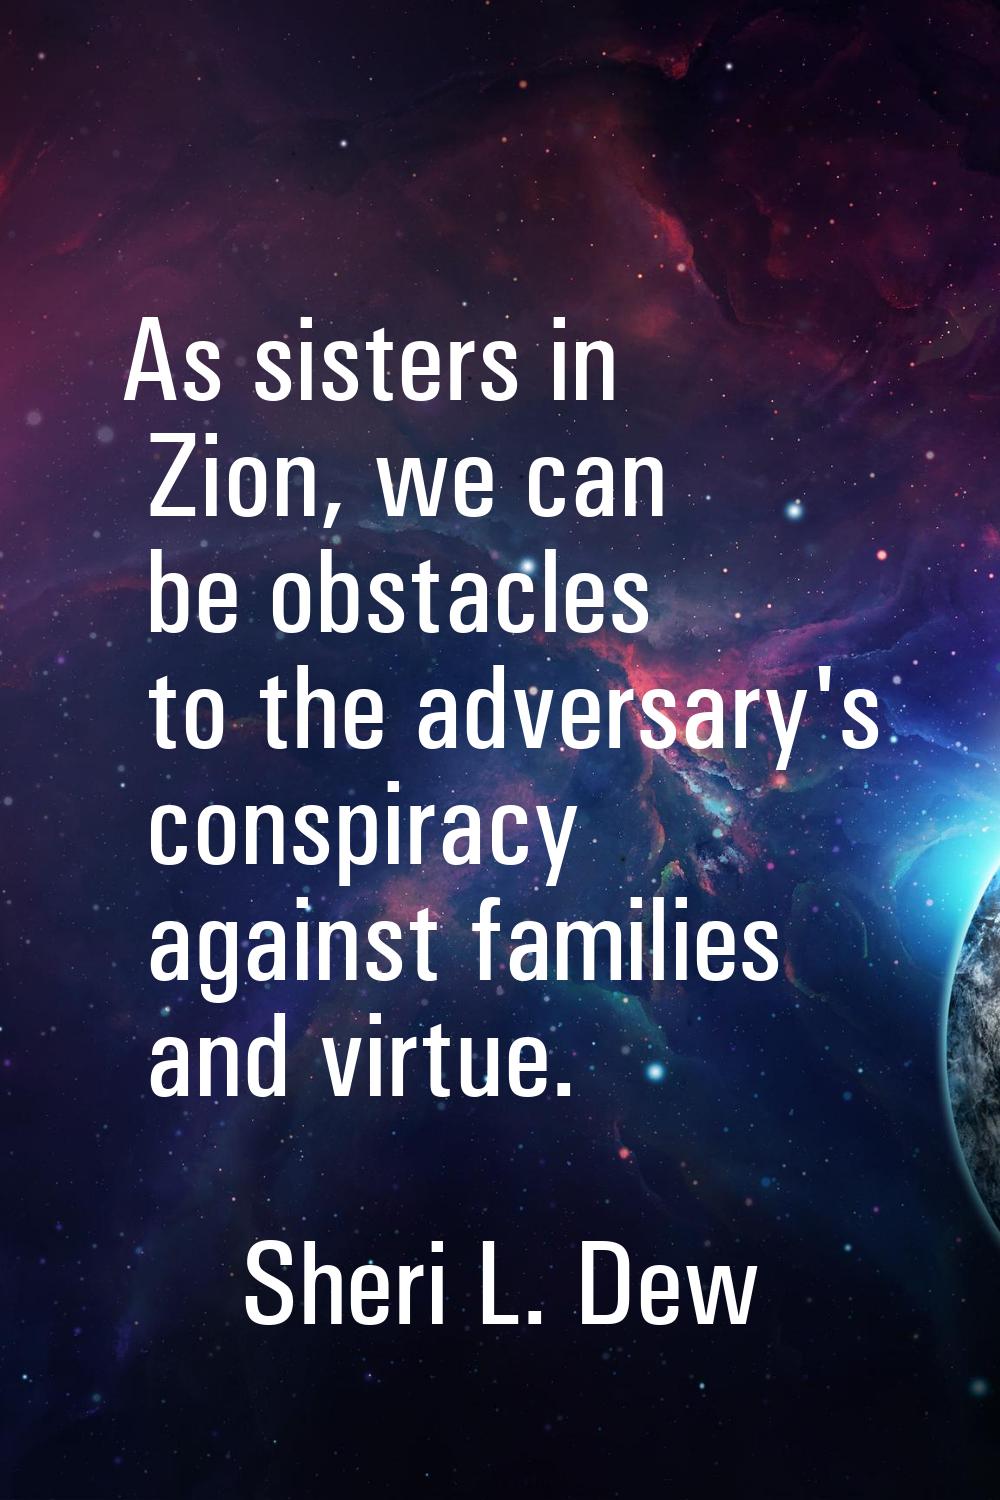 As sisters in Zion, we can be obstacles to the adversary's conspiracy against families and virtue.